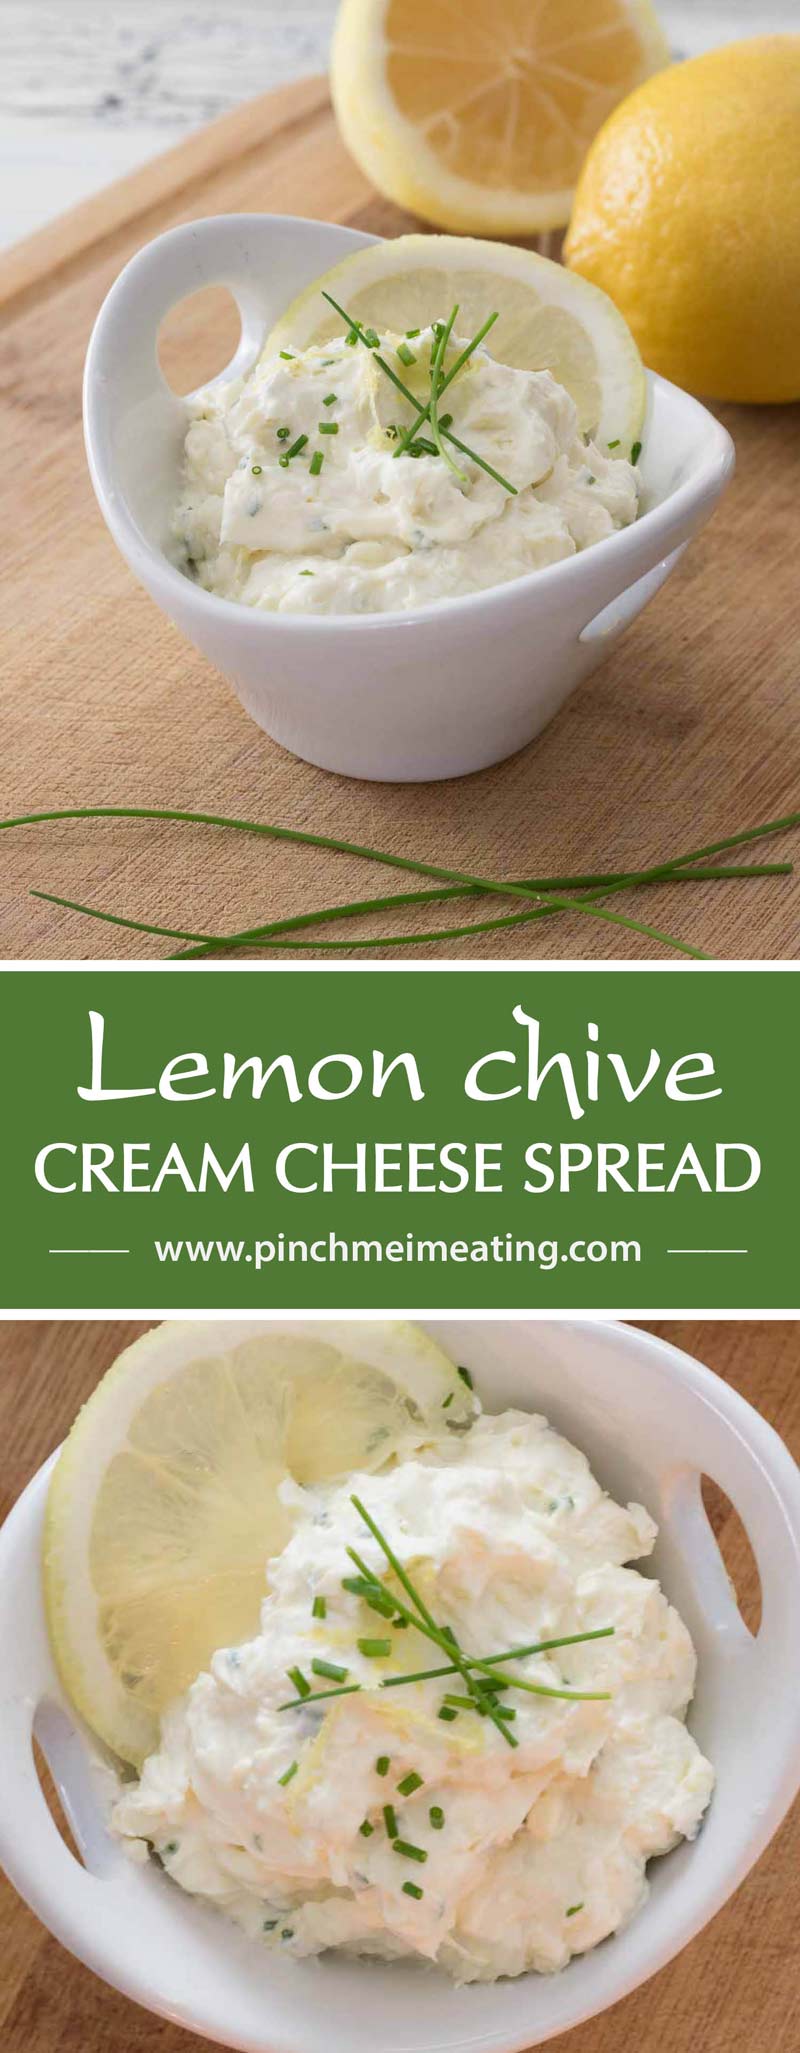 The addition of lemon chive cream cheese spread dresses up any finger sandwich! You'll feel like a queen for afternoon tea!